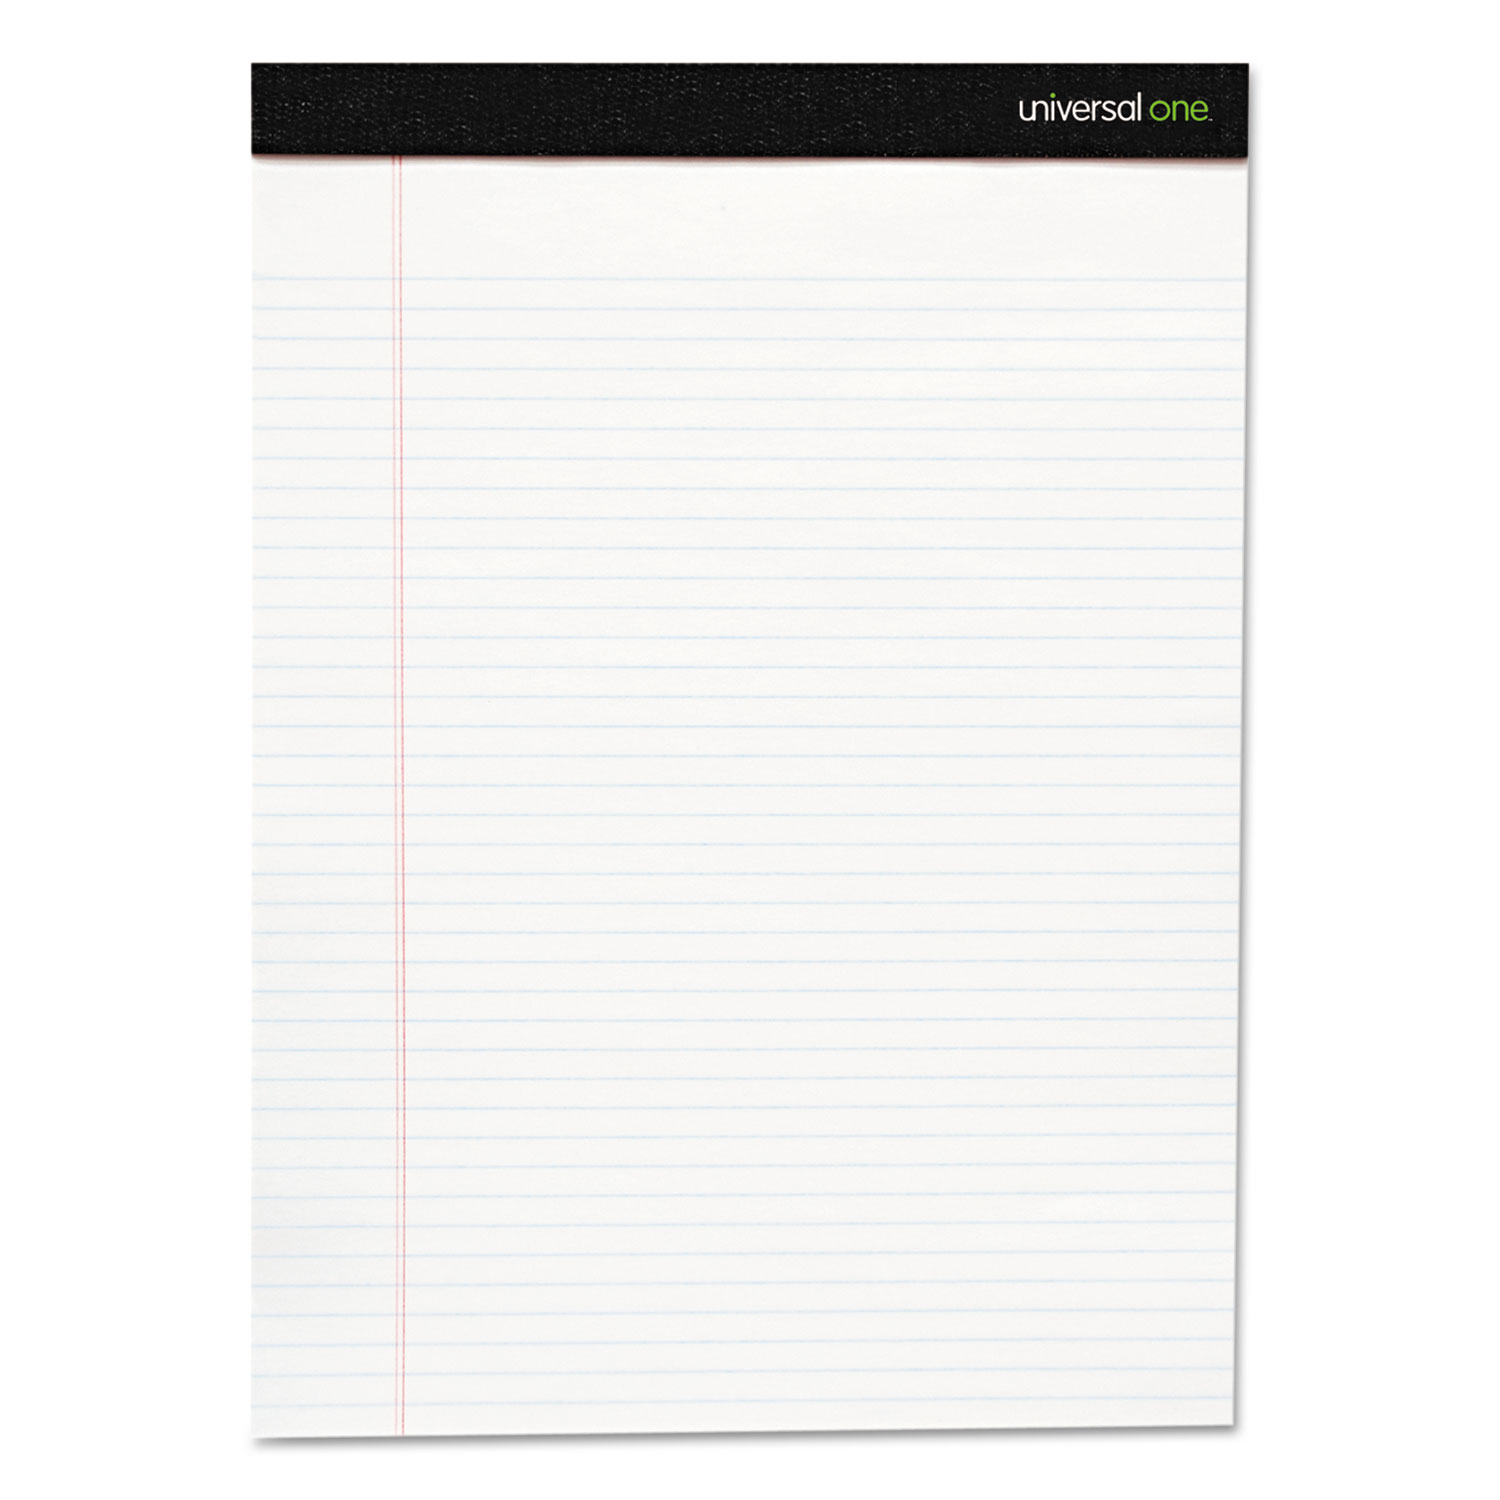  Universal UNV30730 Premium Ruled Writing Pads, Wide/Legal Rule, 8.5 x 11, White, 50 Sheets, 12/Pack (UNV30730) 